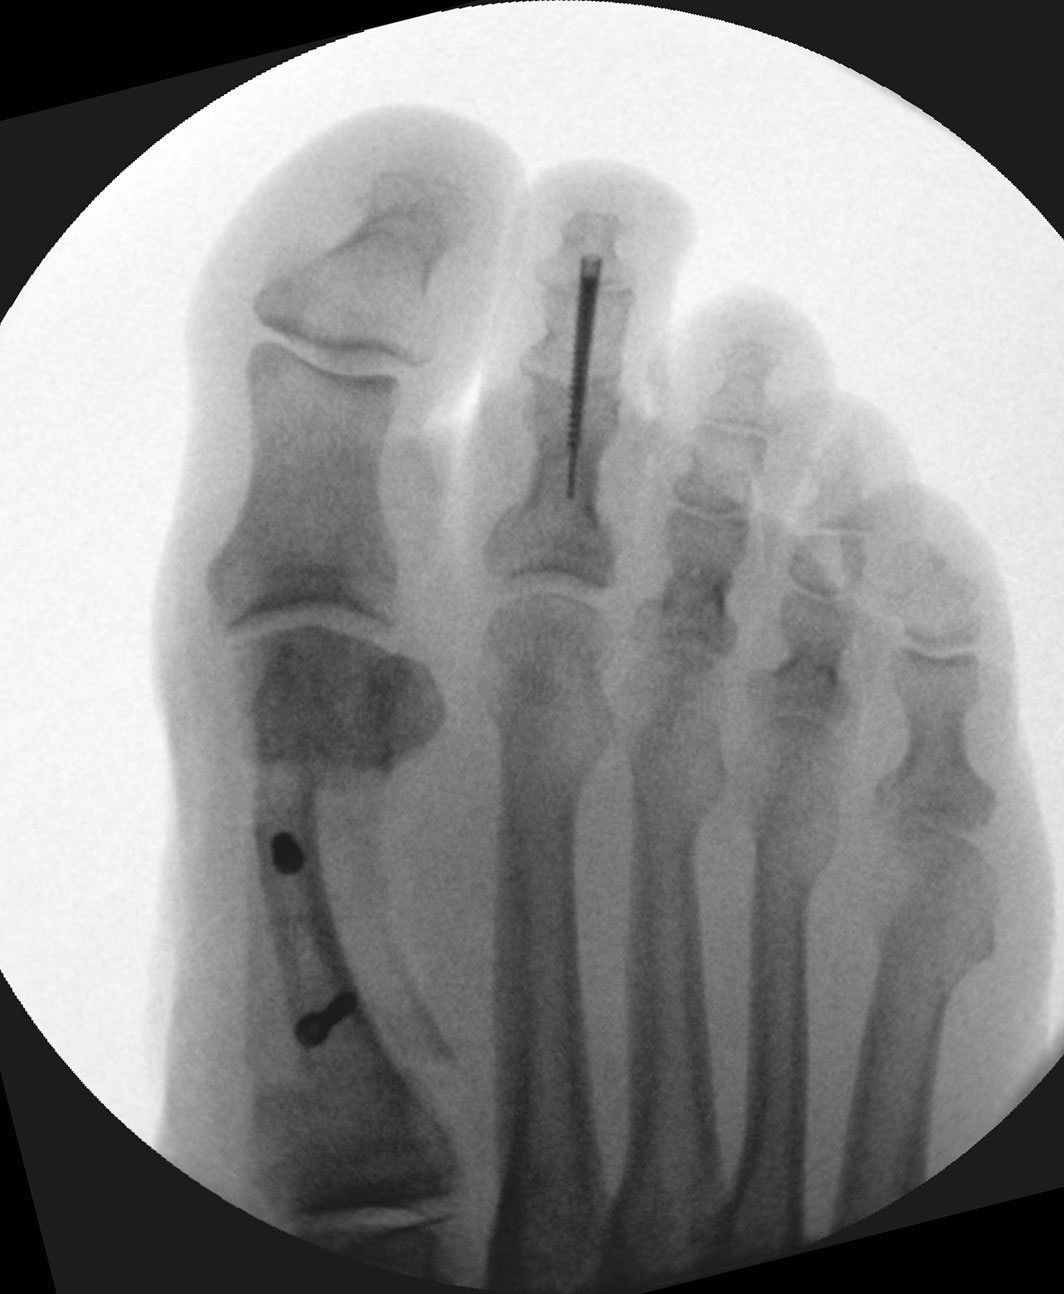 X-ray taken after bunion surgery